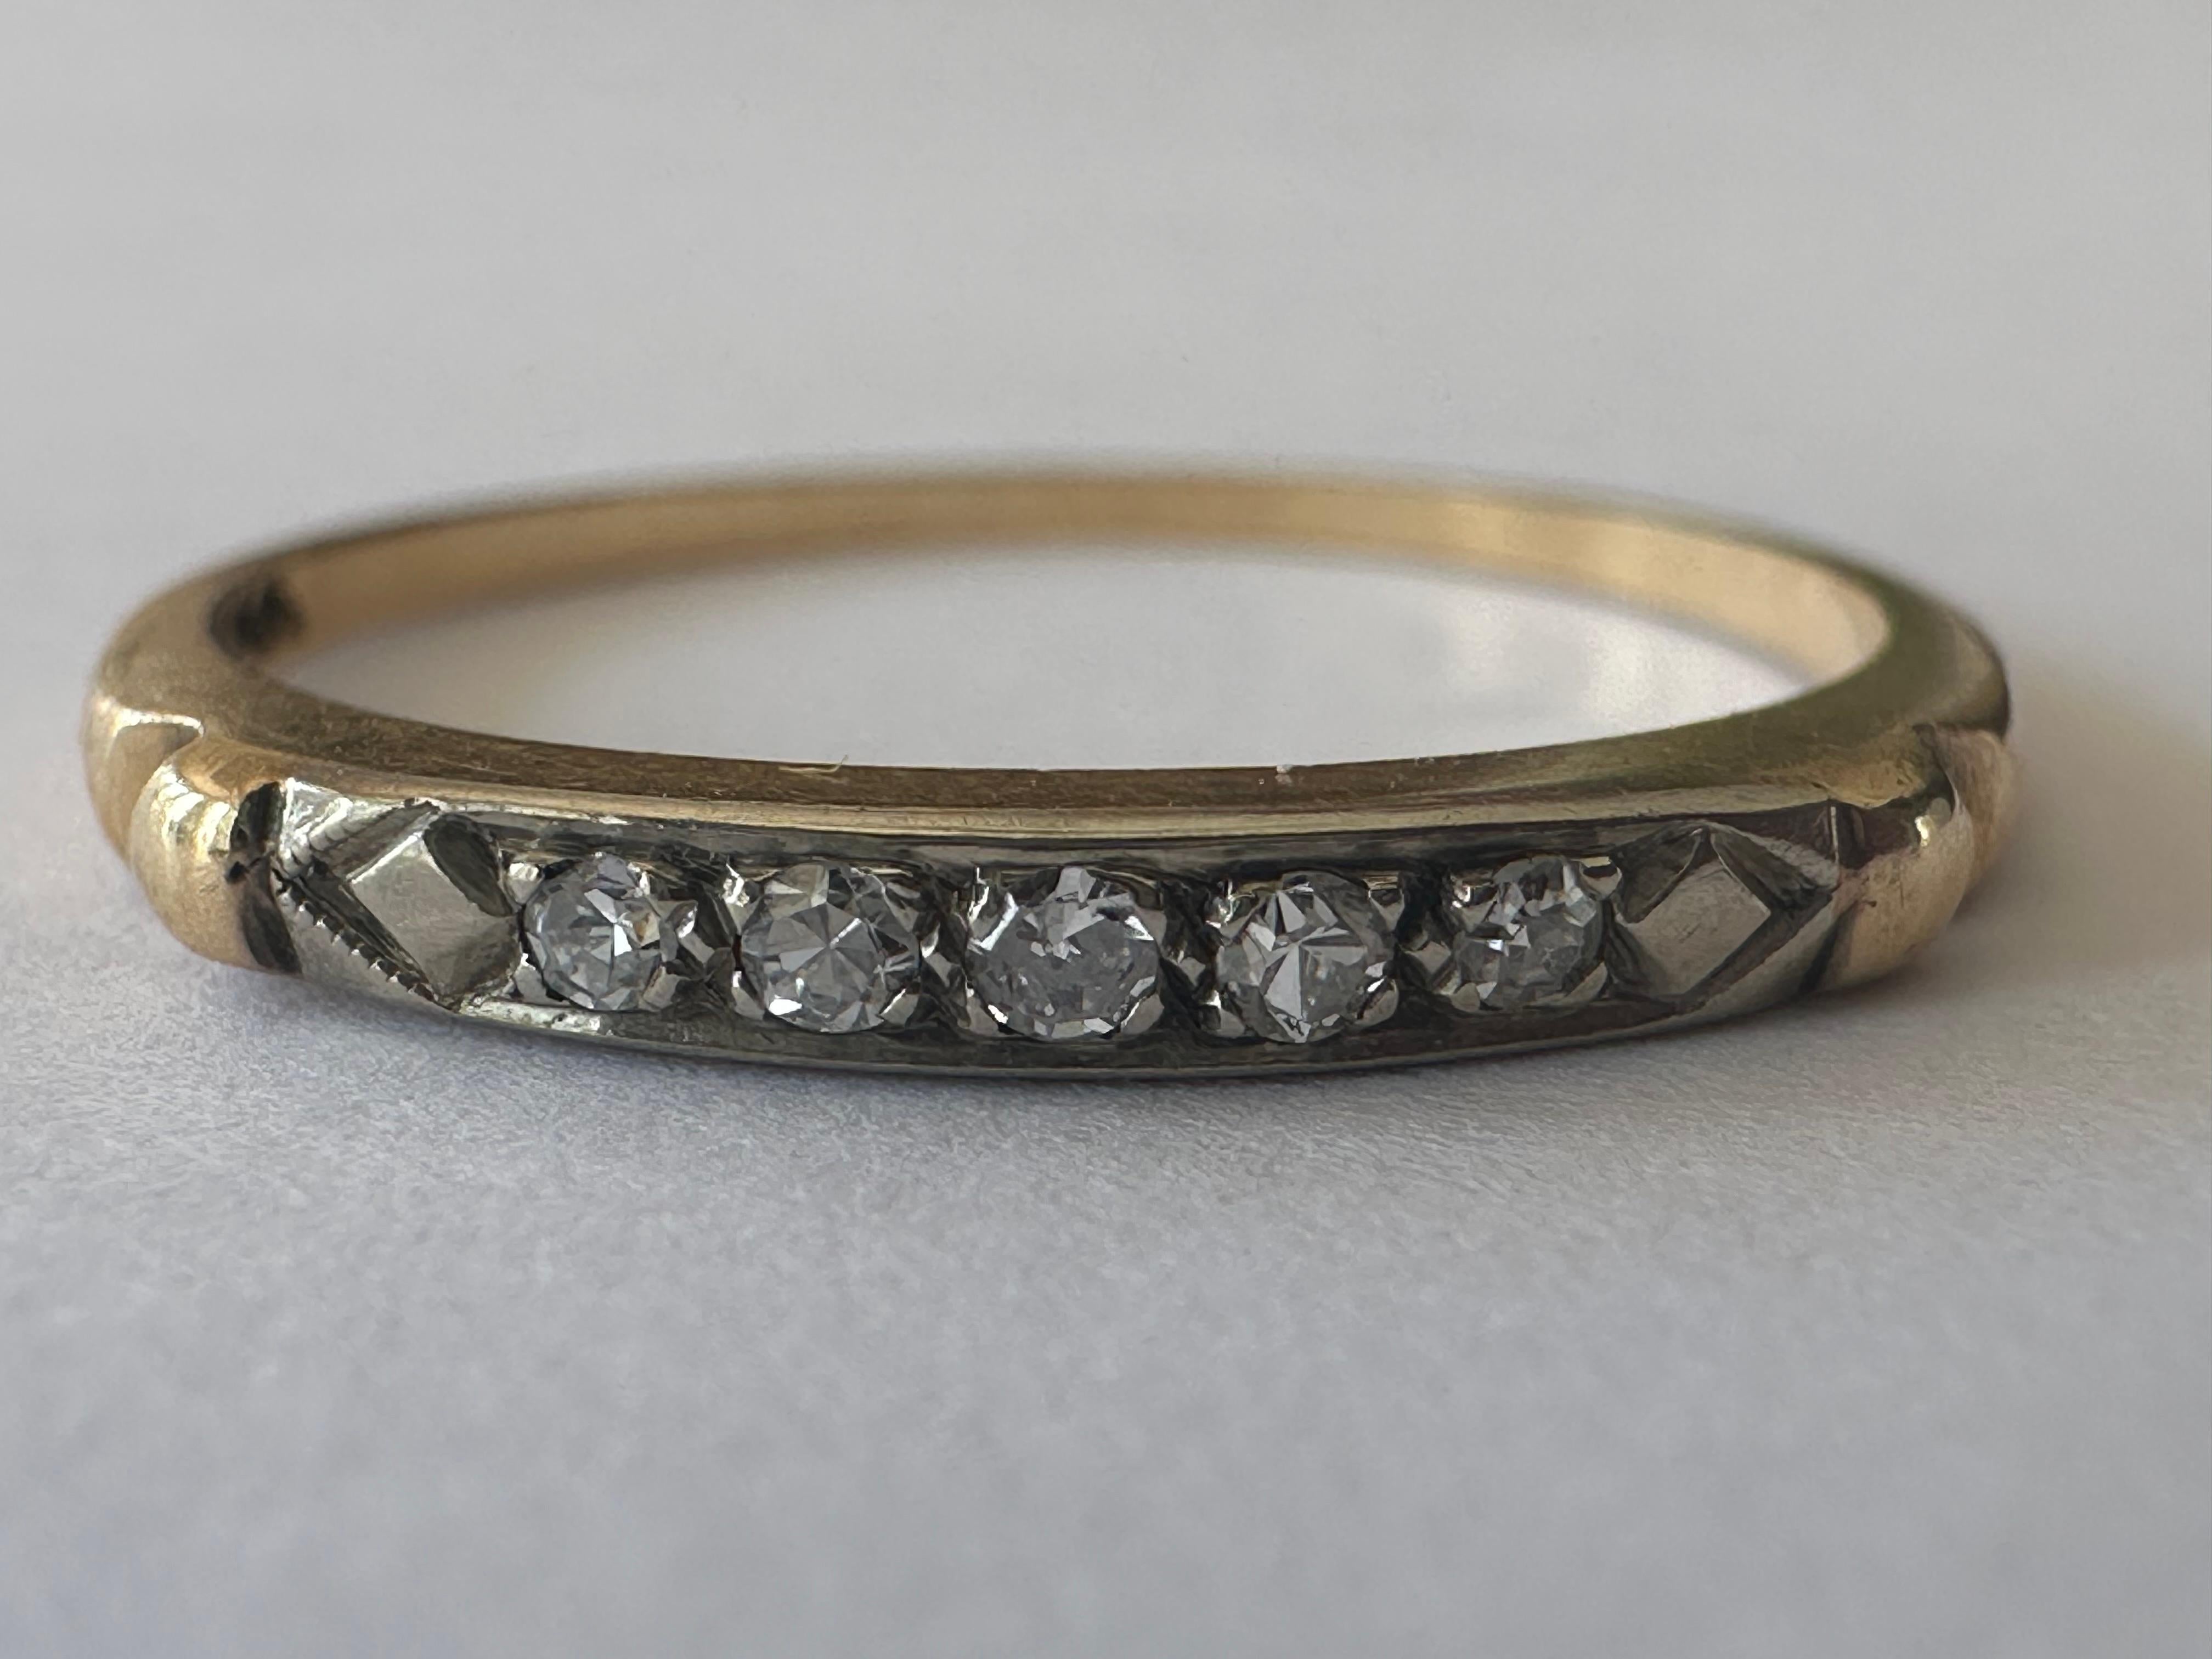 Five single-cut diamonds totaling 0.05 carats H color VS-SI clarity shimmer across the top of this classic mid-century band handcrafted in 14K yellow and white gold. The width of the top of the band measures 2.1mm. 